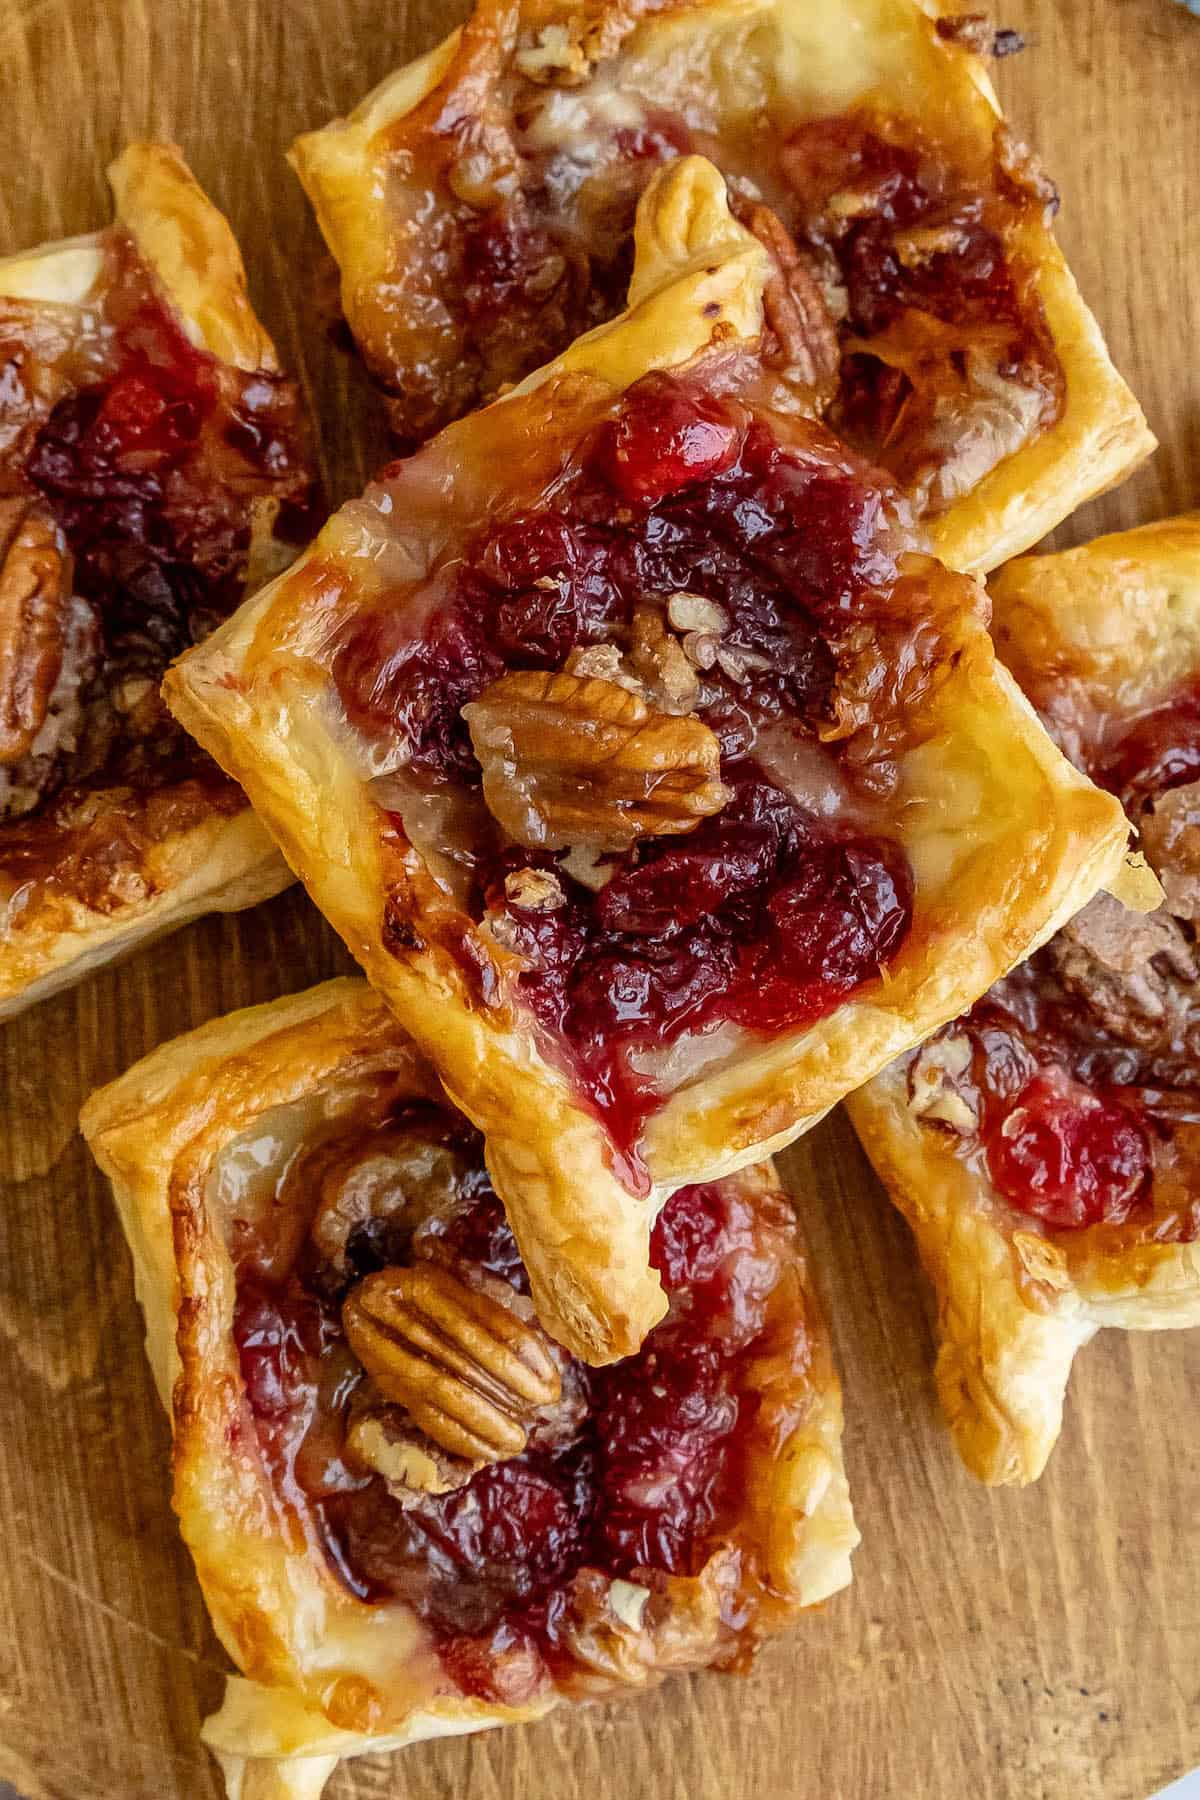 Cranberry pecan tarts and cranberry brie bites on a wooden cutting board.